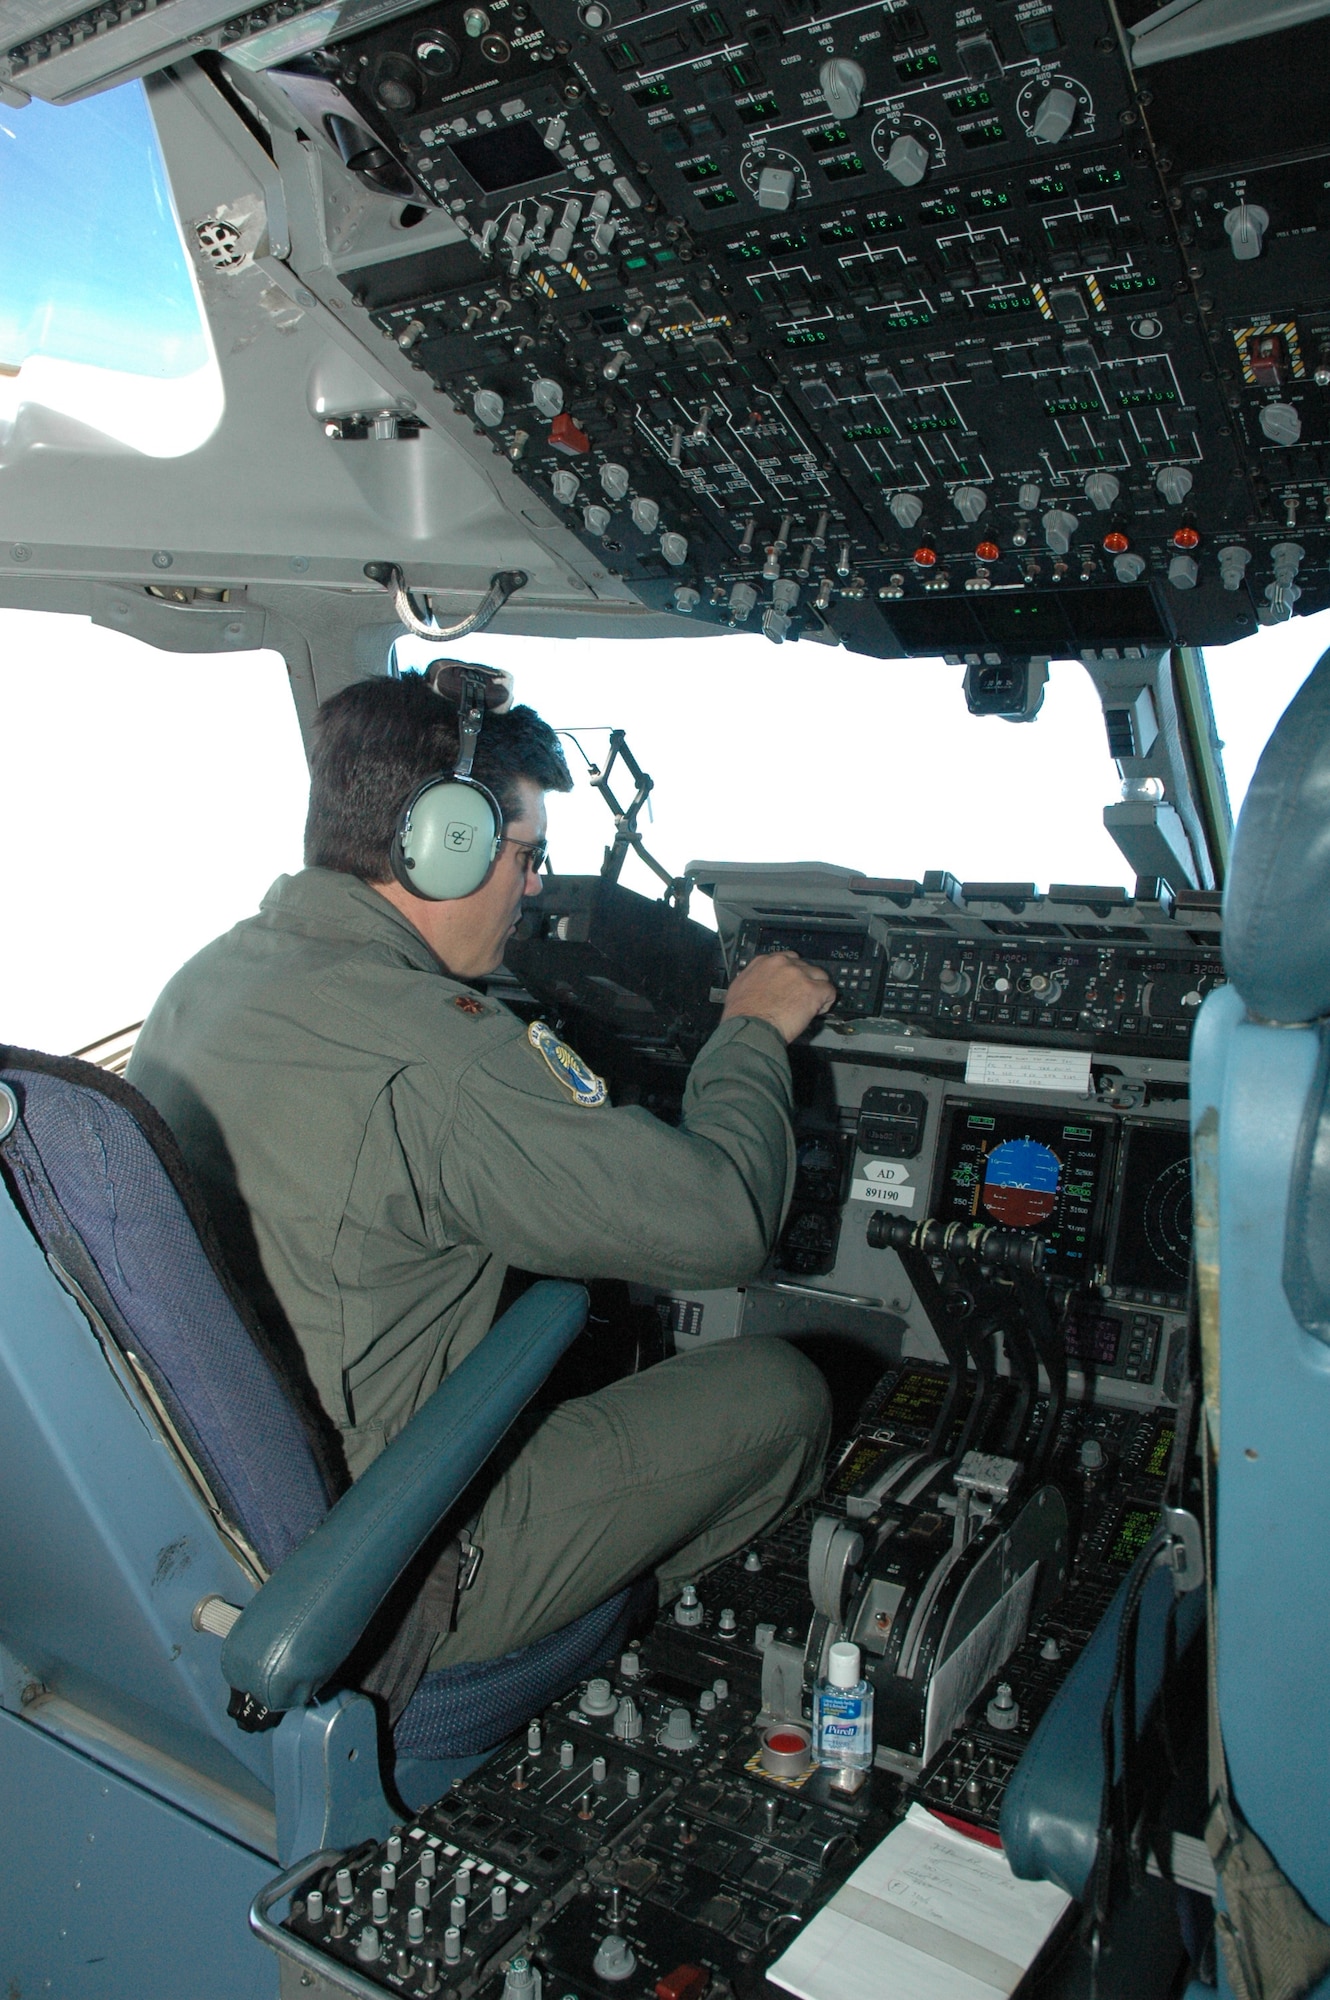 Maj. Mike Phillips, a reserve C-17 pilot assigned to the 300th Airlift Squadron, Charleston AFB, S.C., is evaluated on a "check-ride" during a training mission. (Photo by 1st Lt. Wayne Capps, USAFR)